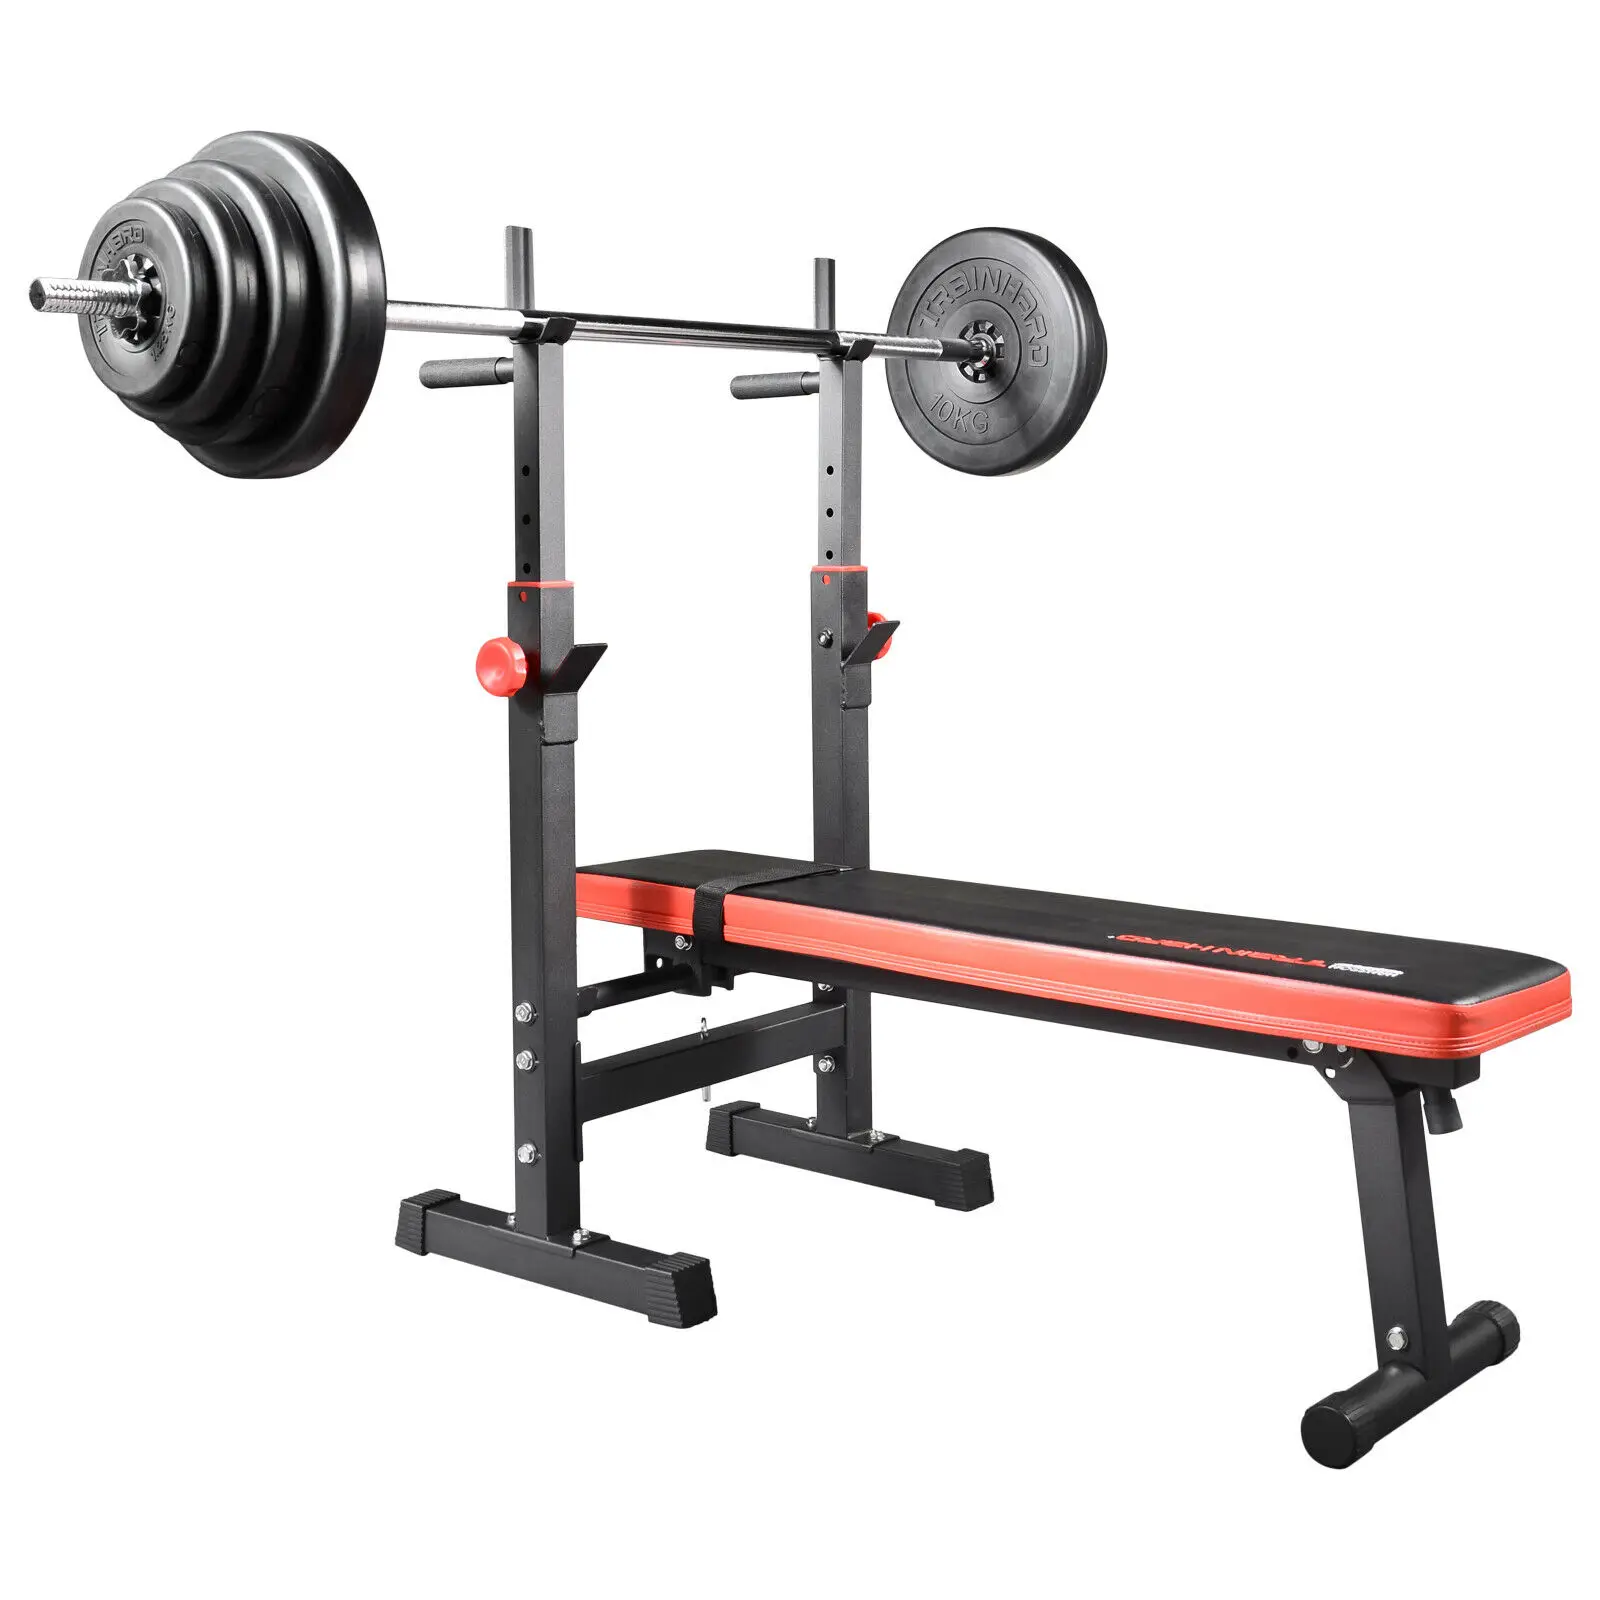 

2018 best sale cheap ningbo Sports Fitness Steel Frame Flat Weight Training Bench with Cross Bars gym weight bench, Customized color